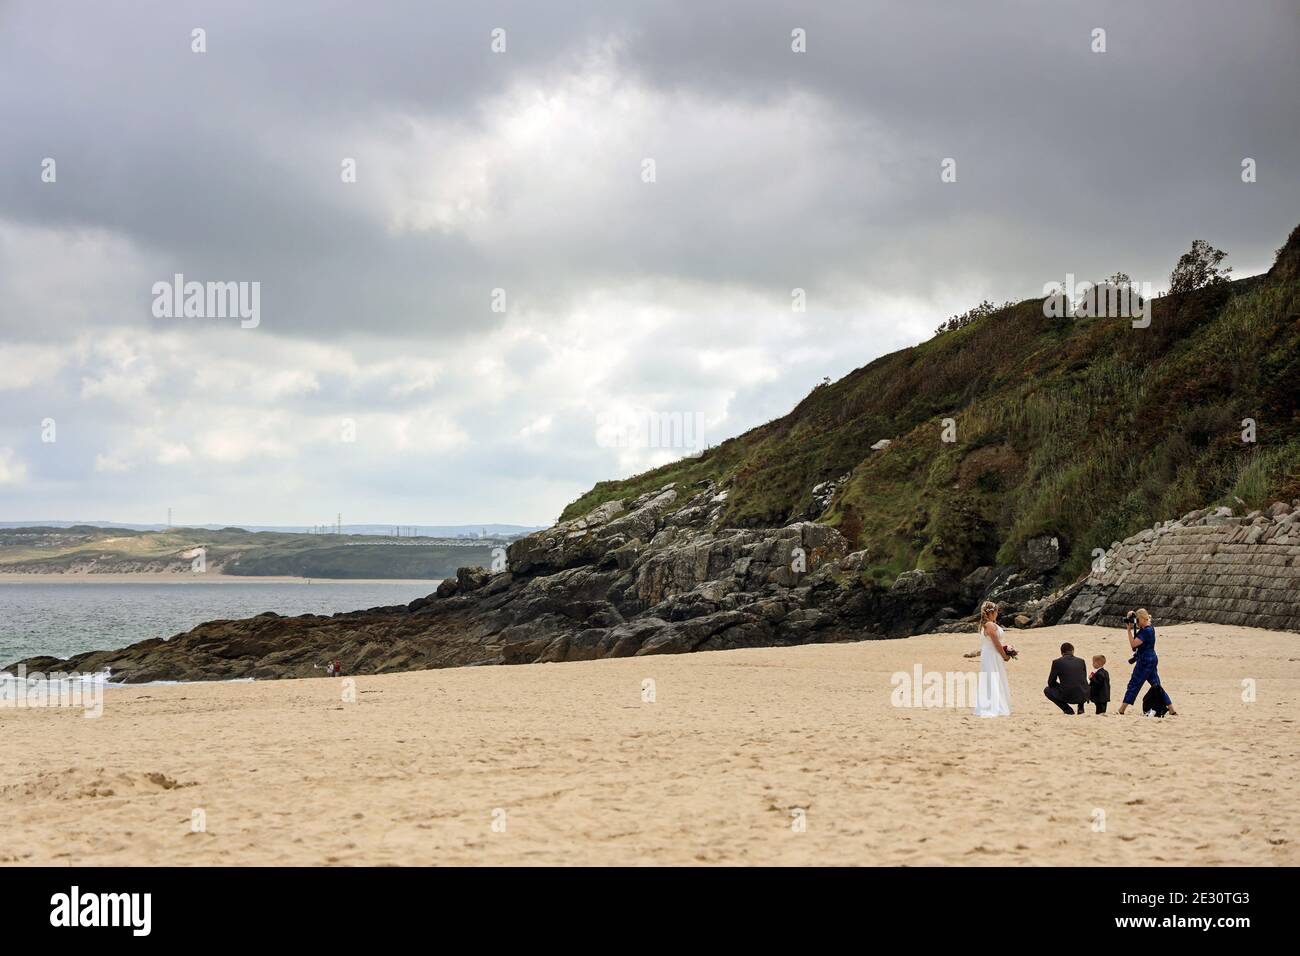 A near deserted Porthminster Beach in the Cornish town of St Ives provides a perfect setting for a wedding photographer to record a special day. The a Stock Photo